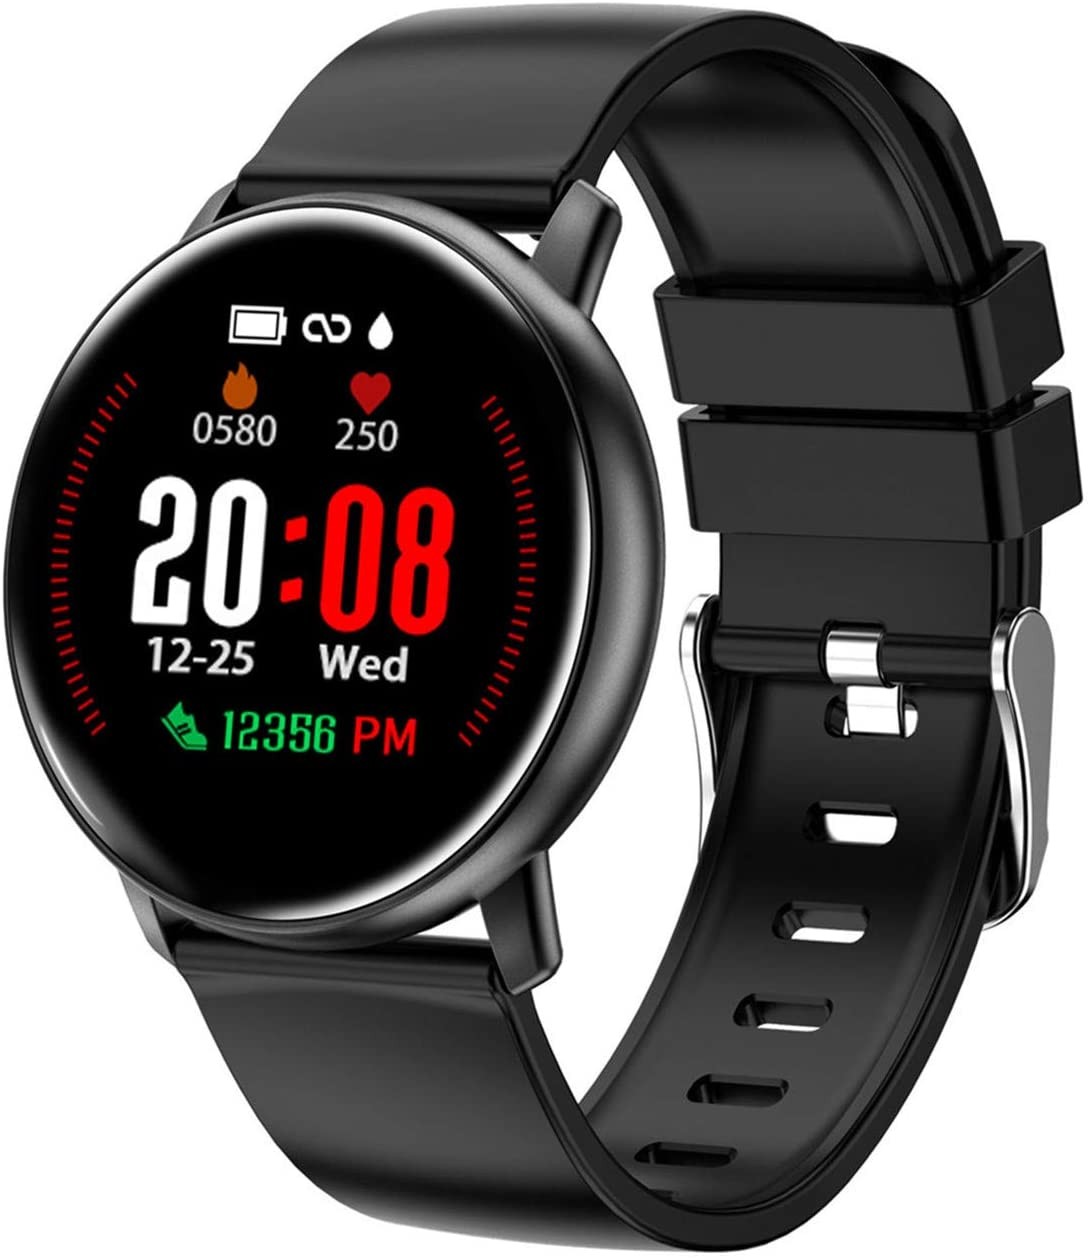 Smart Watch for Android Phones and iPhone Compatible, Smartwatches for Women Men, Fitness Tracker